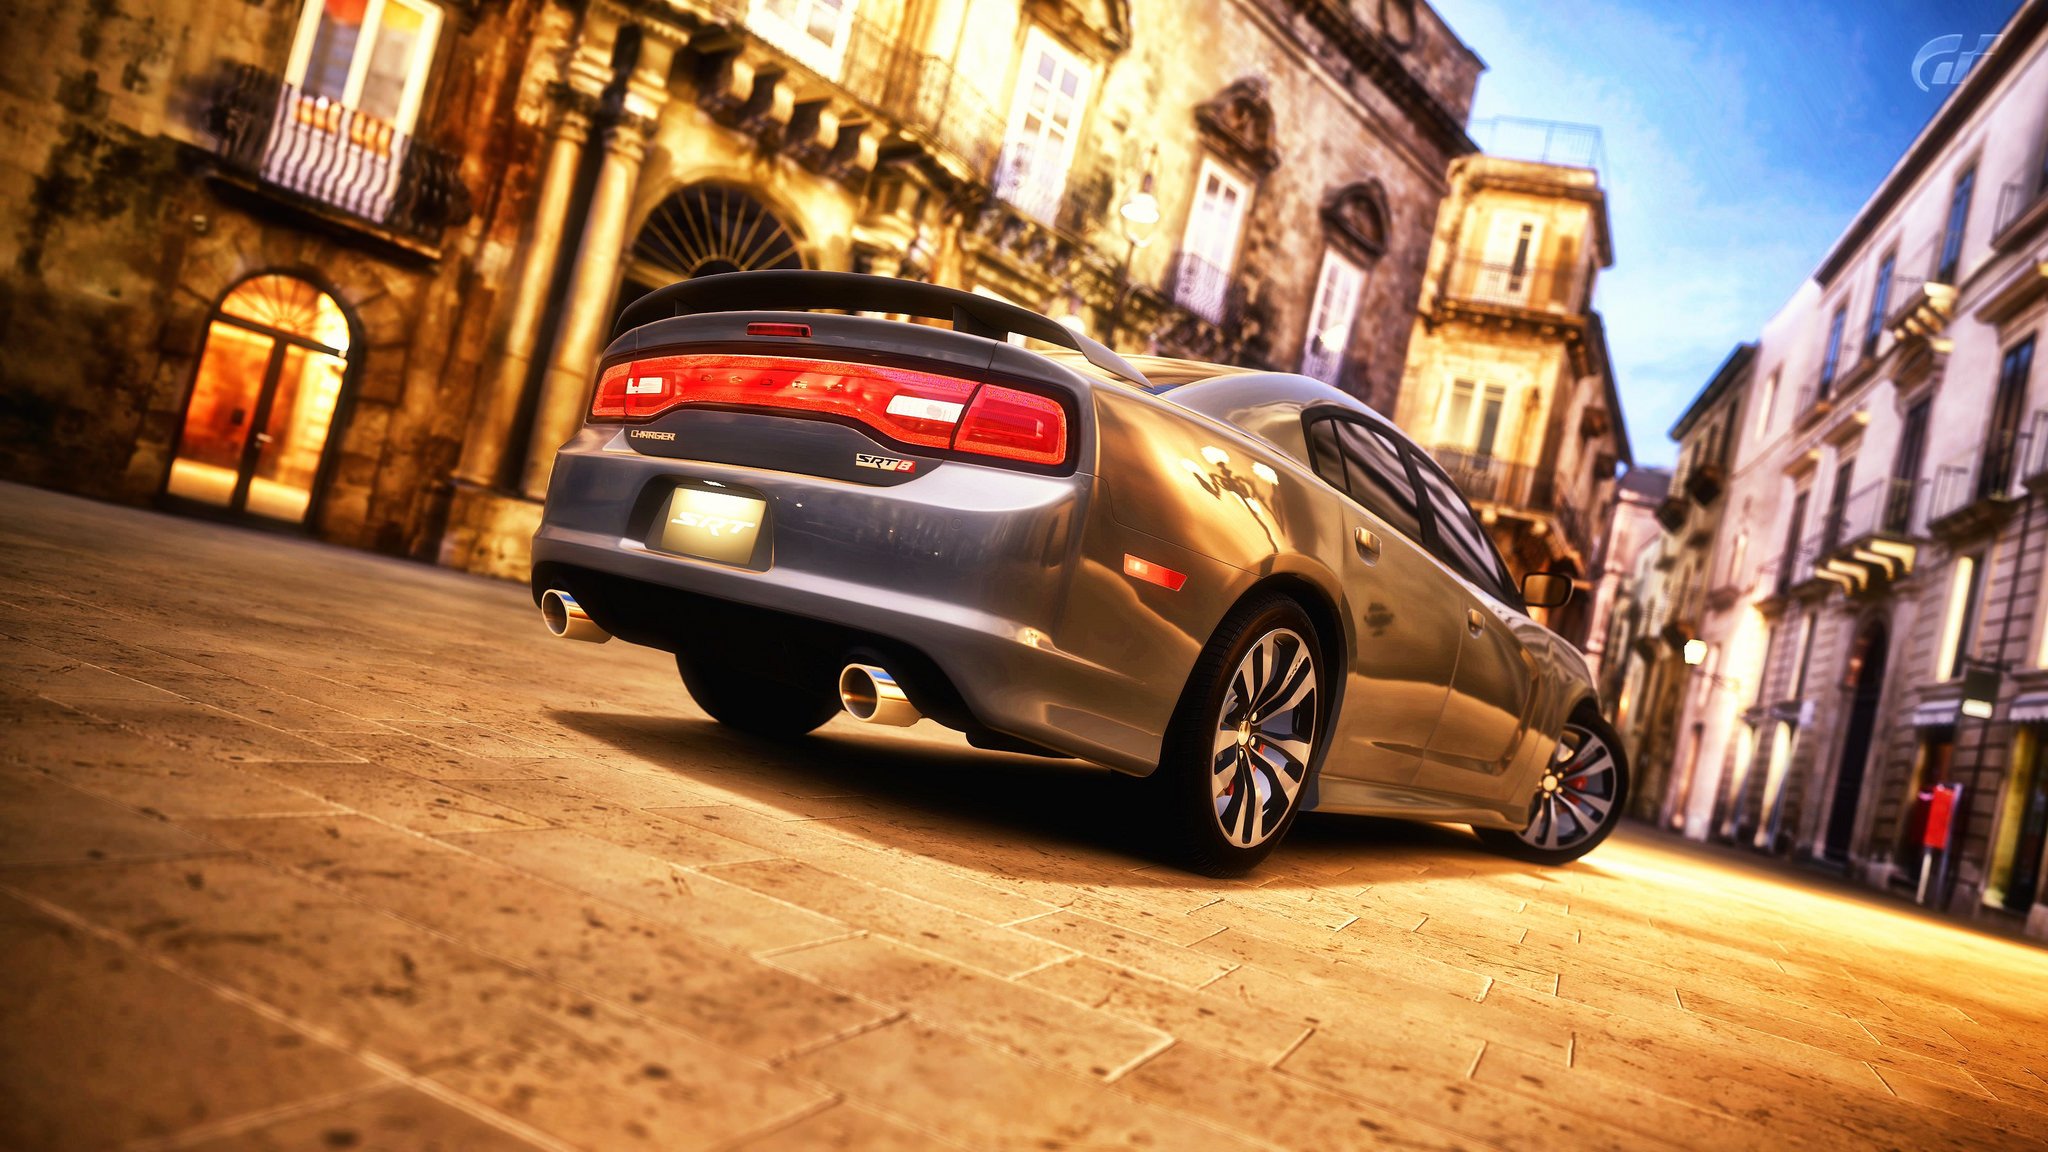 How much are Dodge Charger insurance rates?